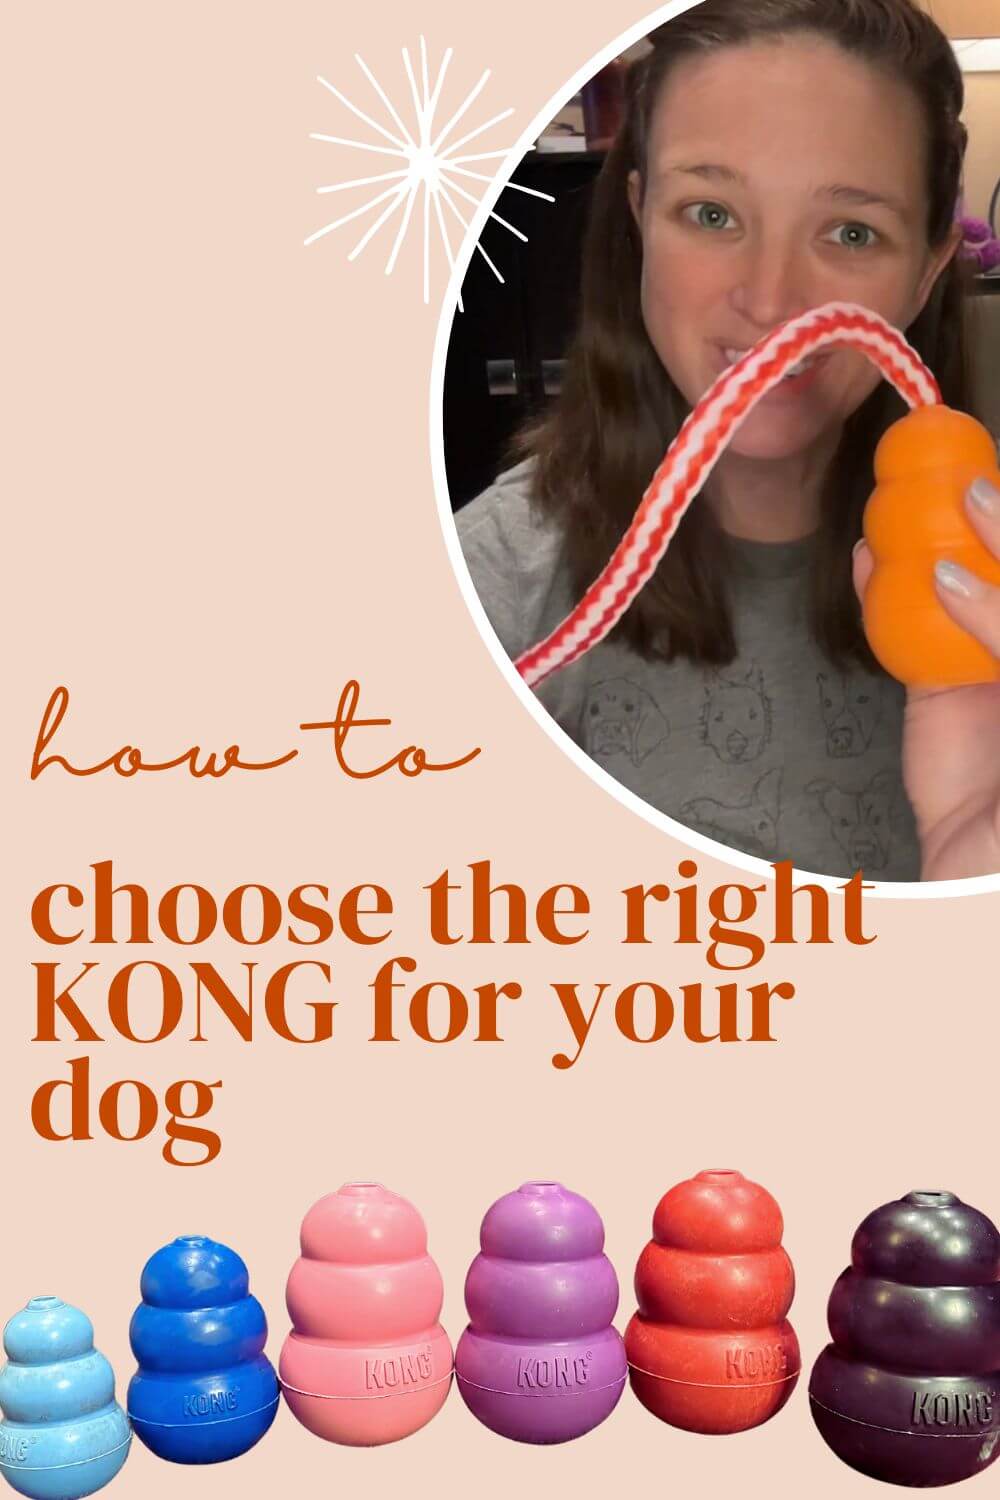 The KONG dog toy color guide!